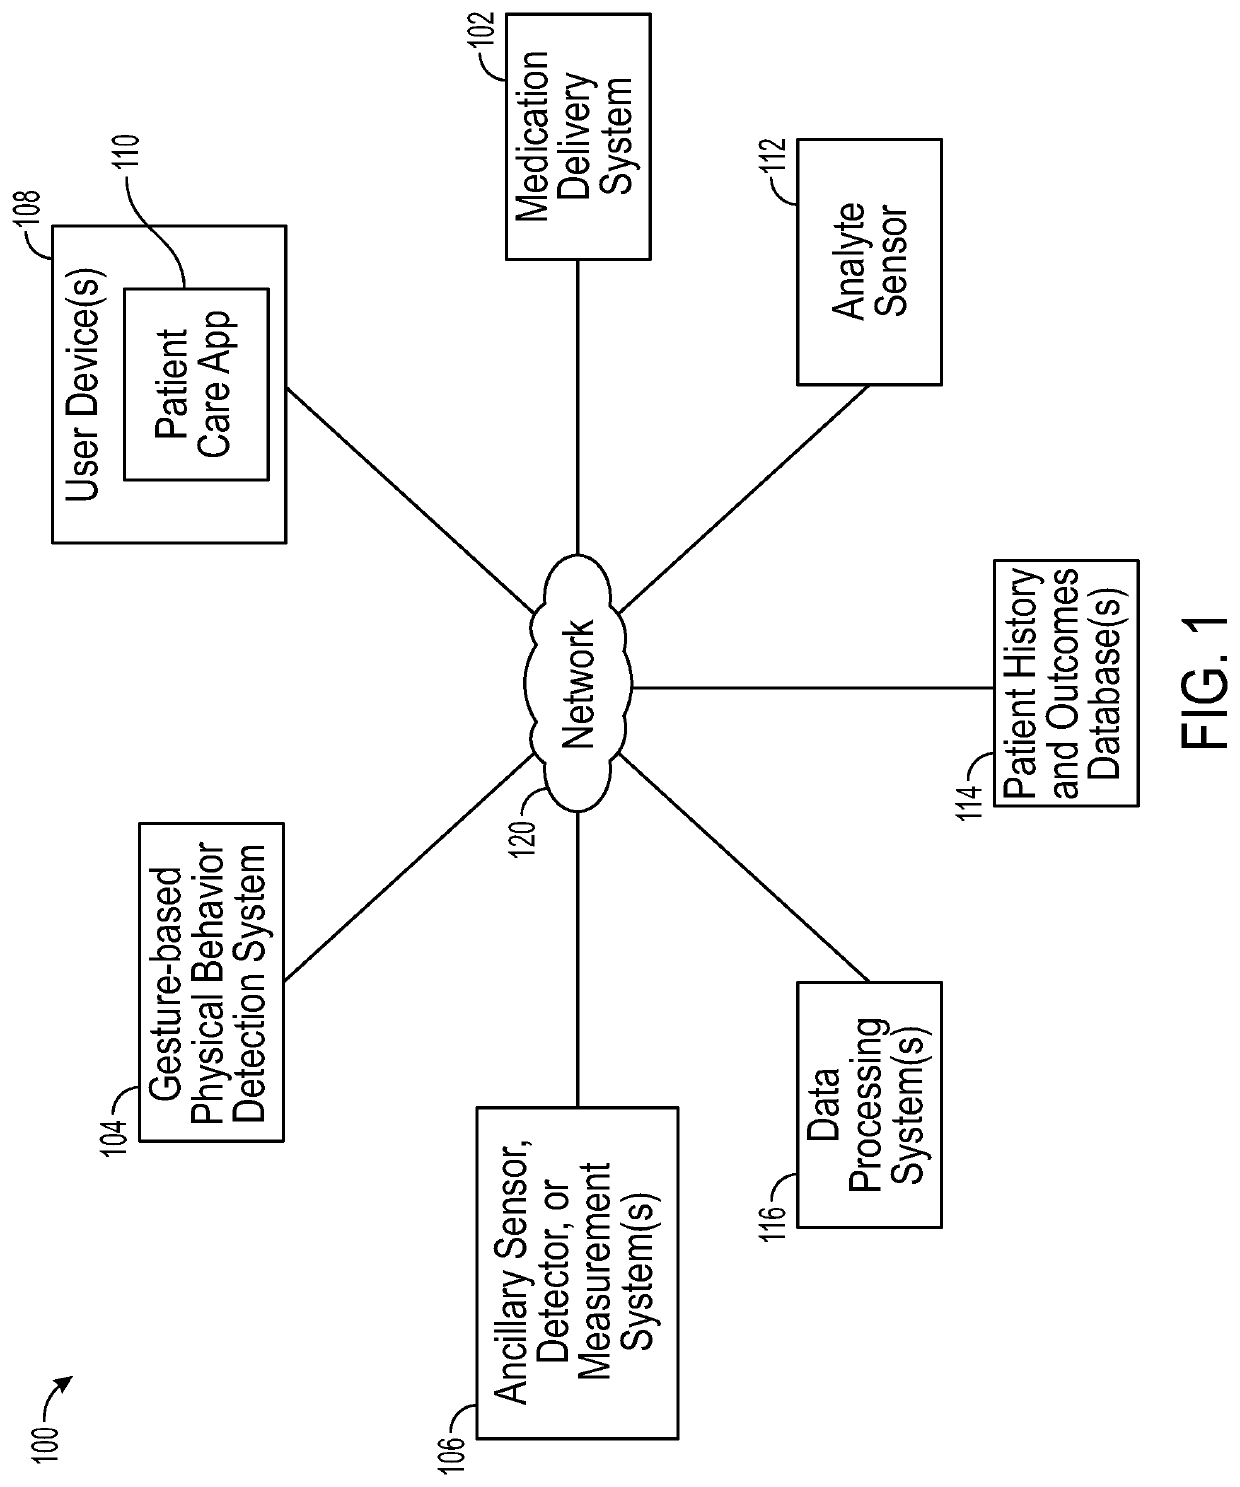 Medical device configuration procedure guidance responsive to detected gestures